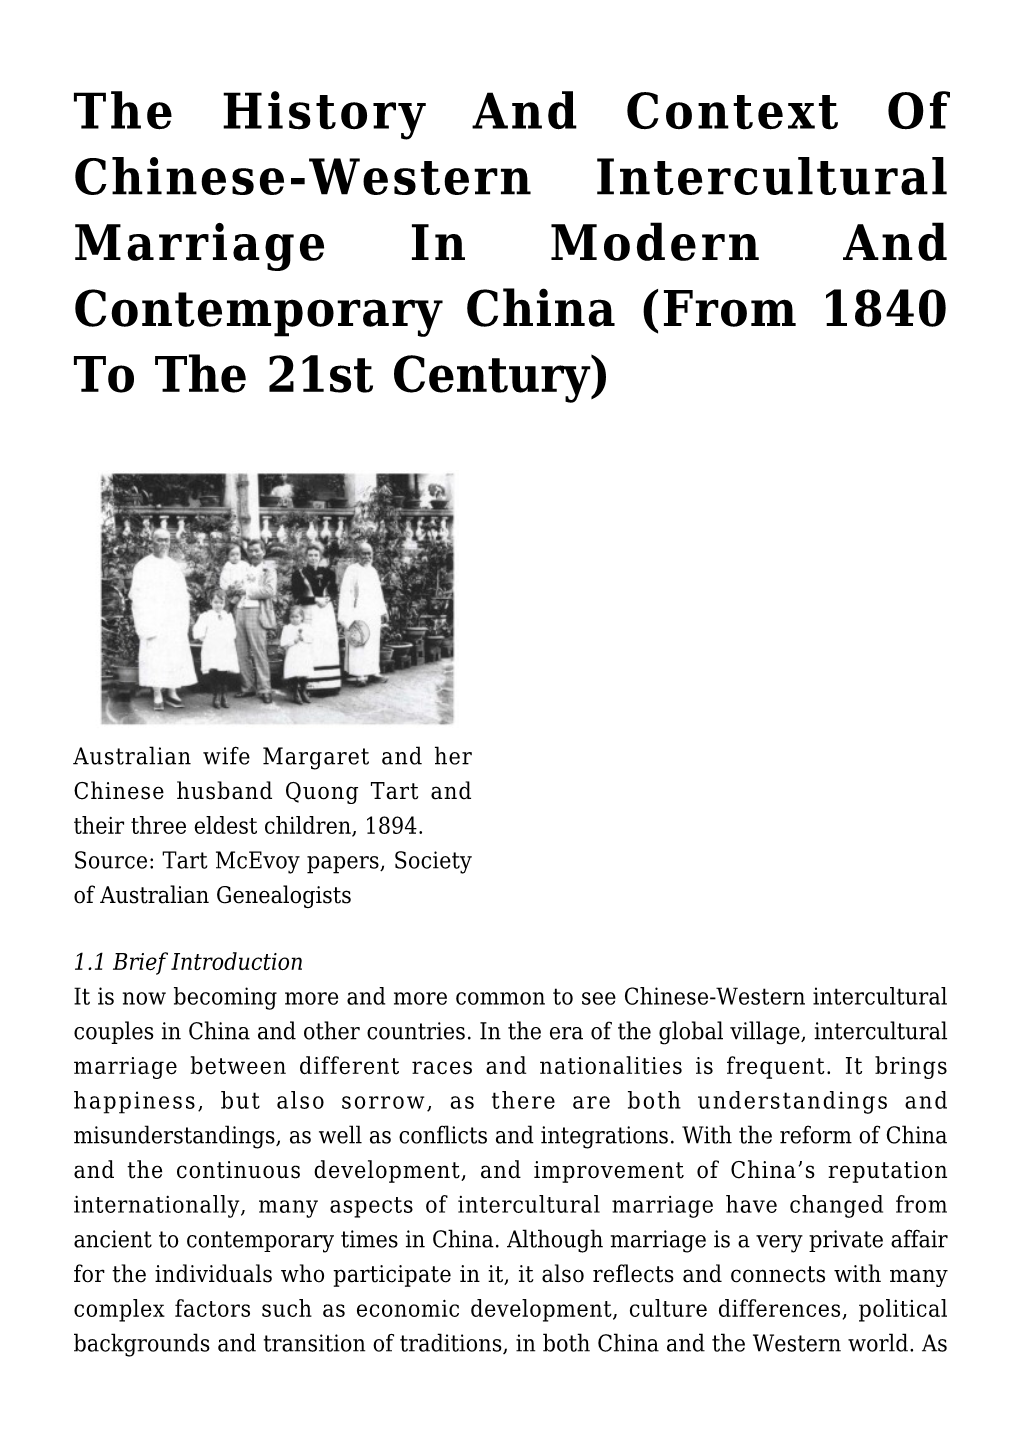 The History and Context of Chinese-Western Intercultural Marriage in Modern and Contemporary China (From 1840 to the 21St Century)